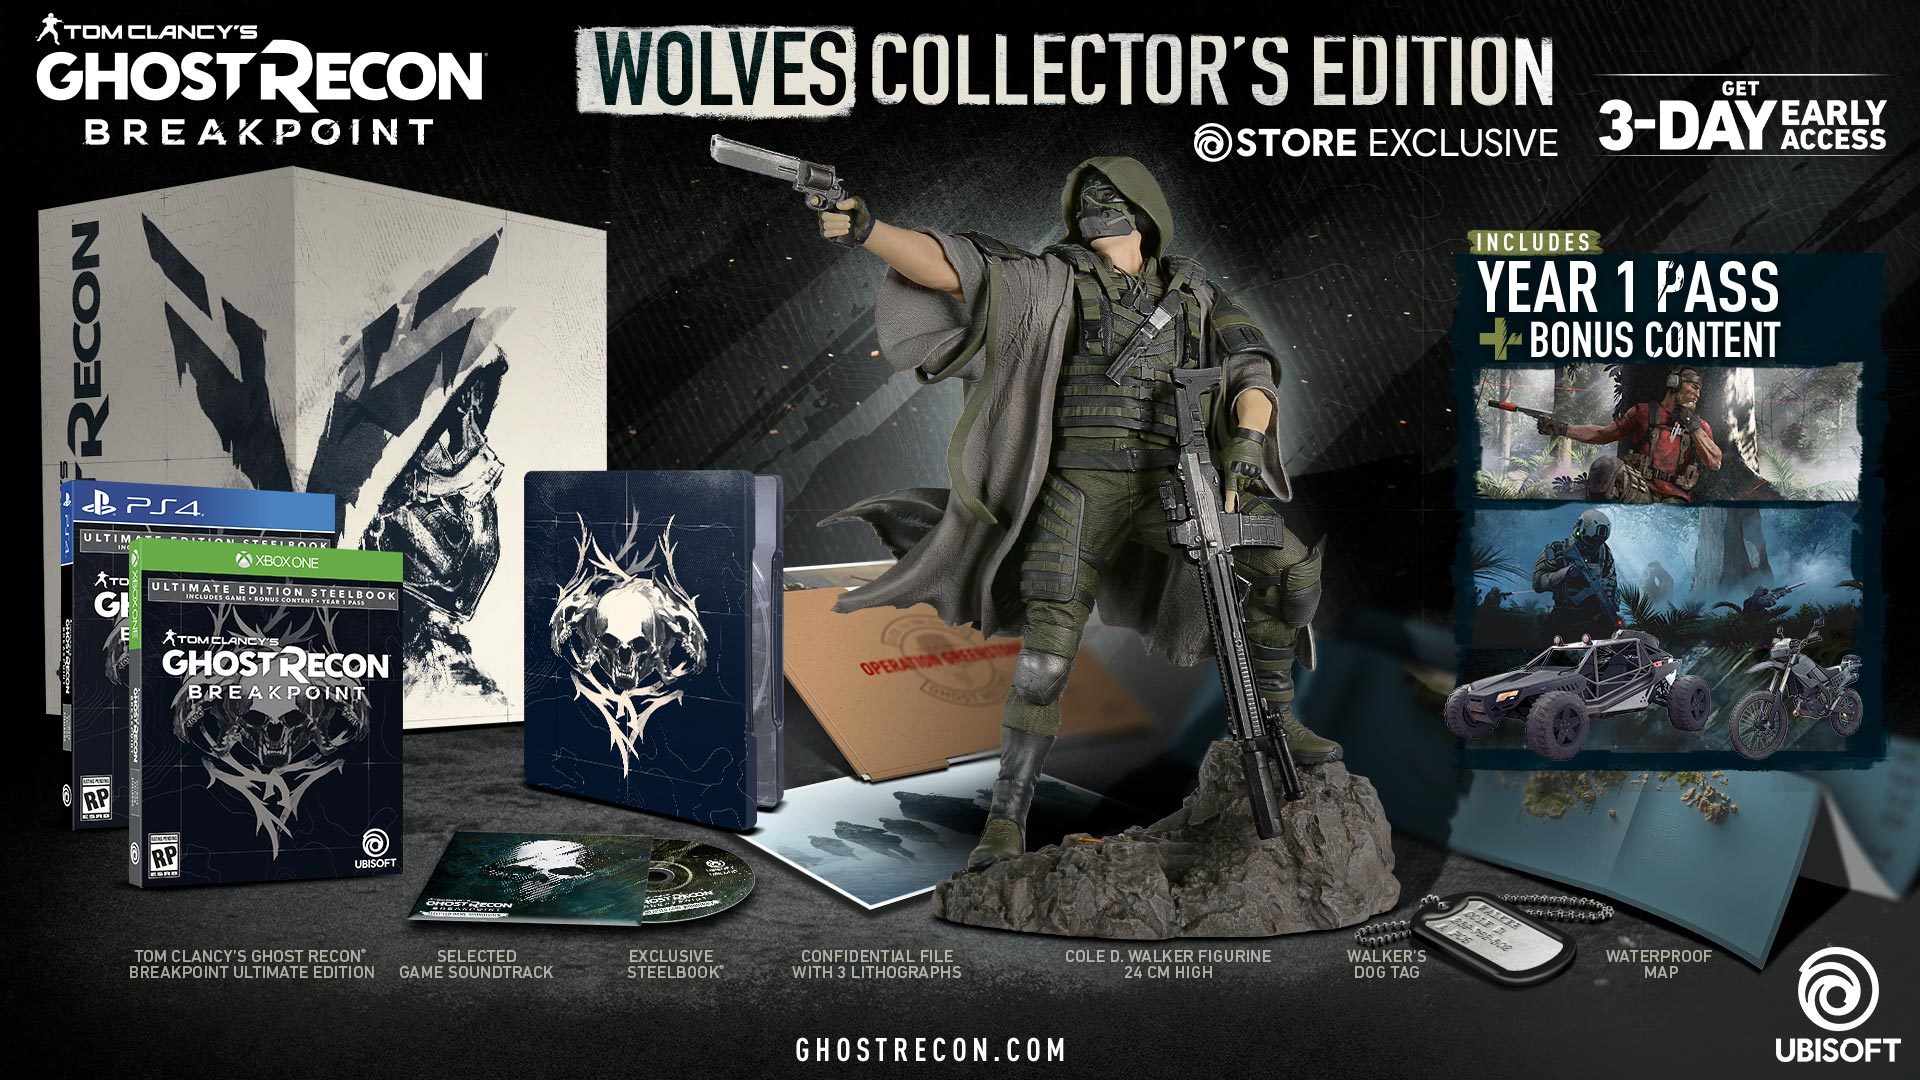 Tom Clancy's Ghost Recon: Breakpoint - Wolves Collector's Edition (Xbox One), Ubisoft